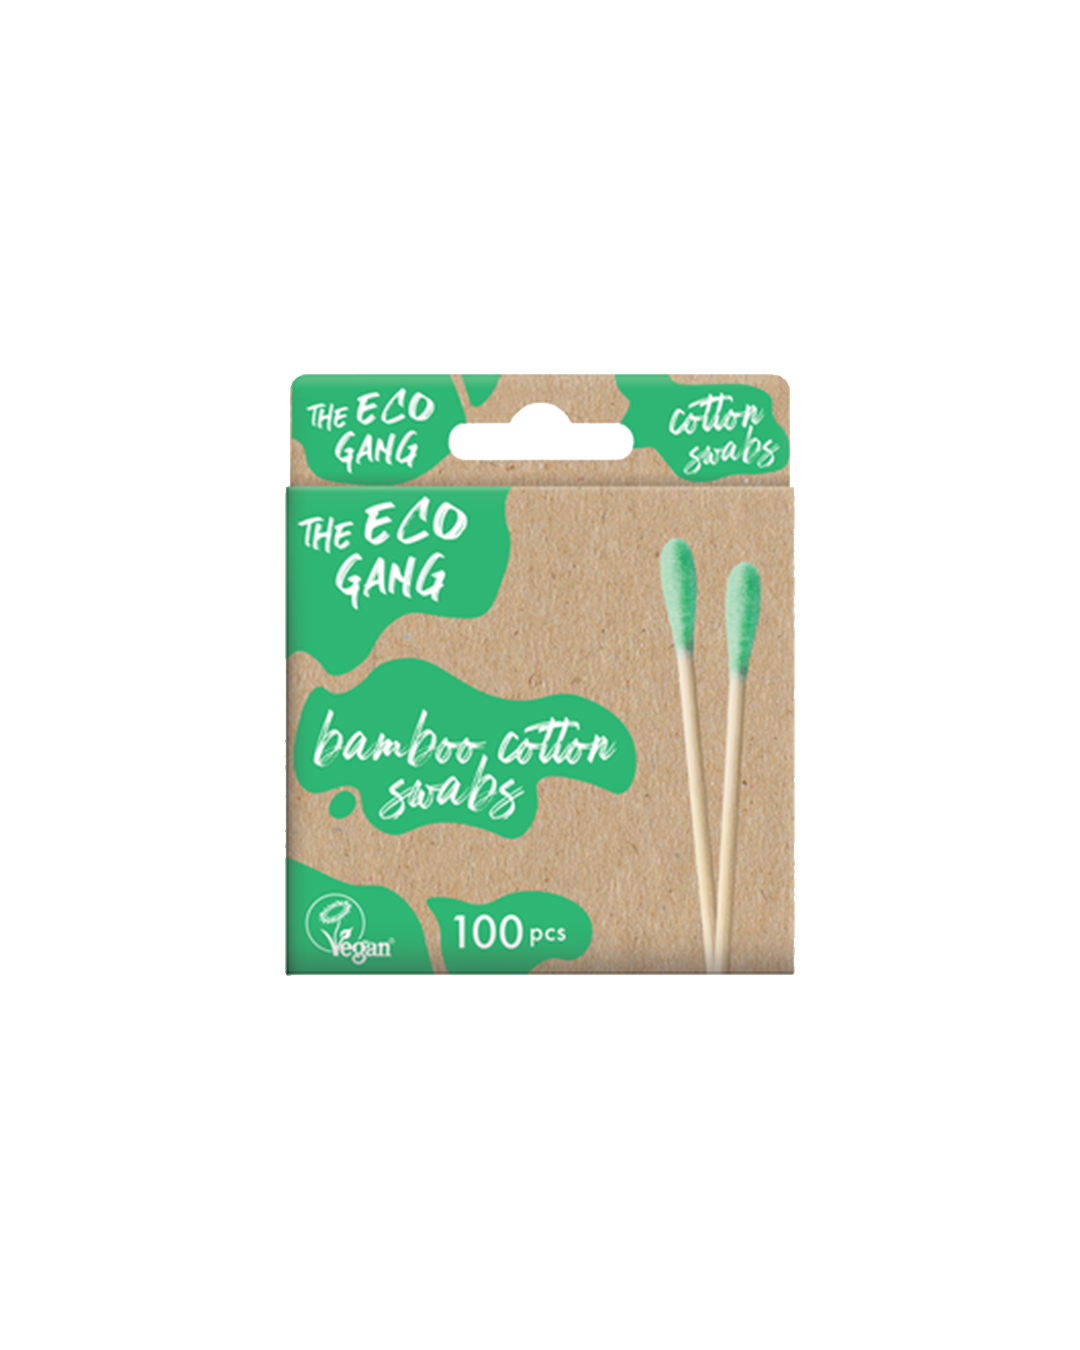 The Eco Gang Cotton Swabs 100-p - Green